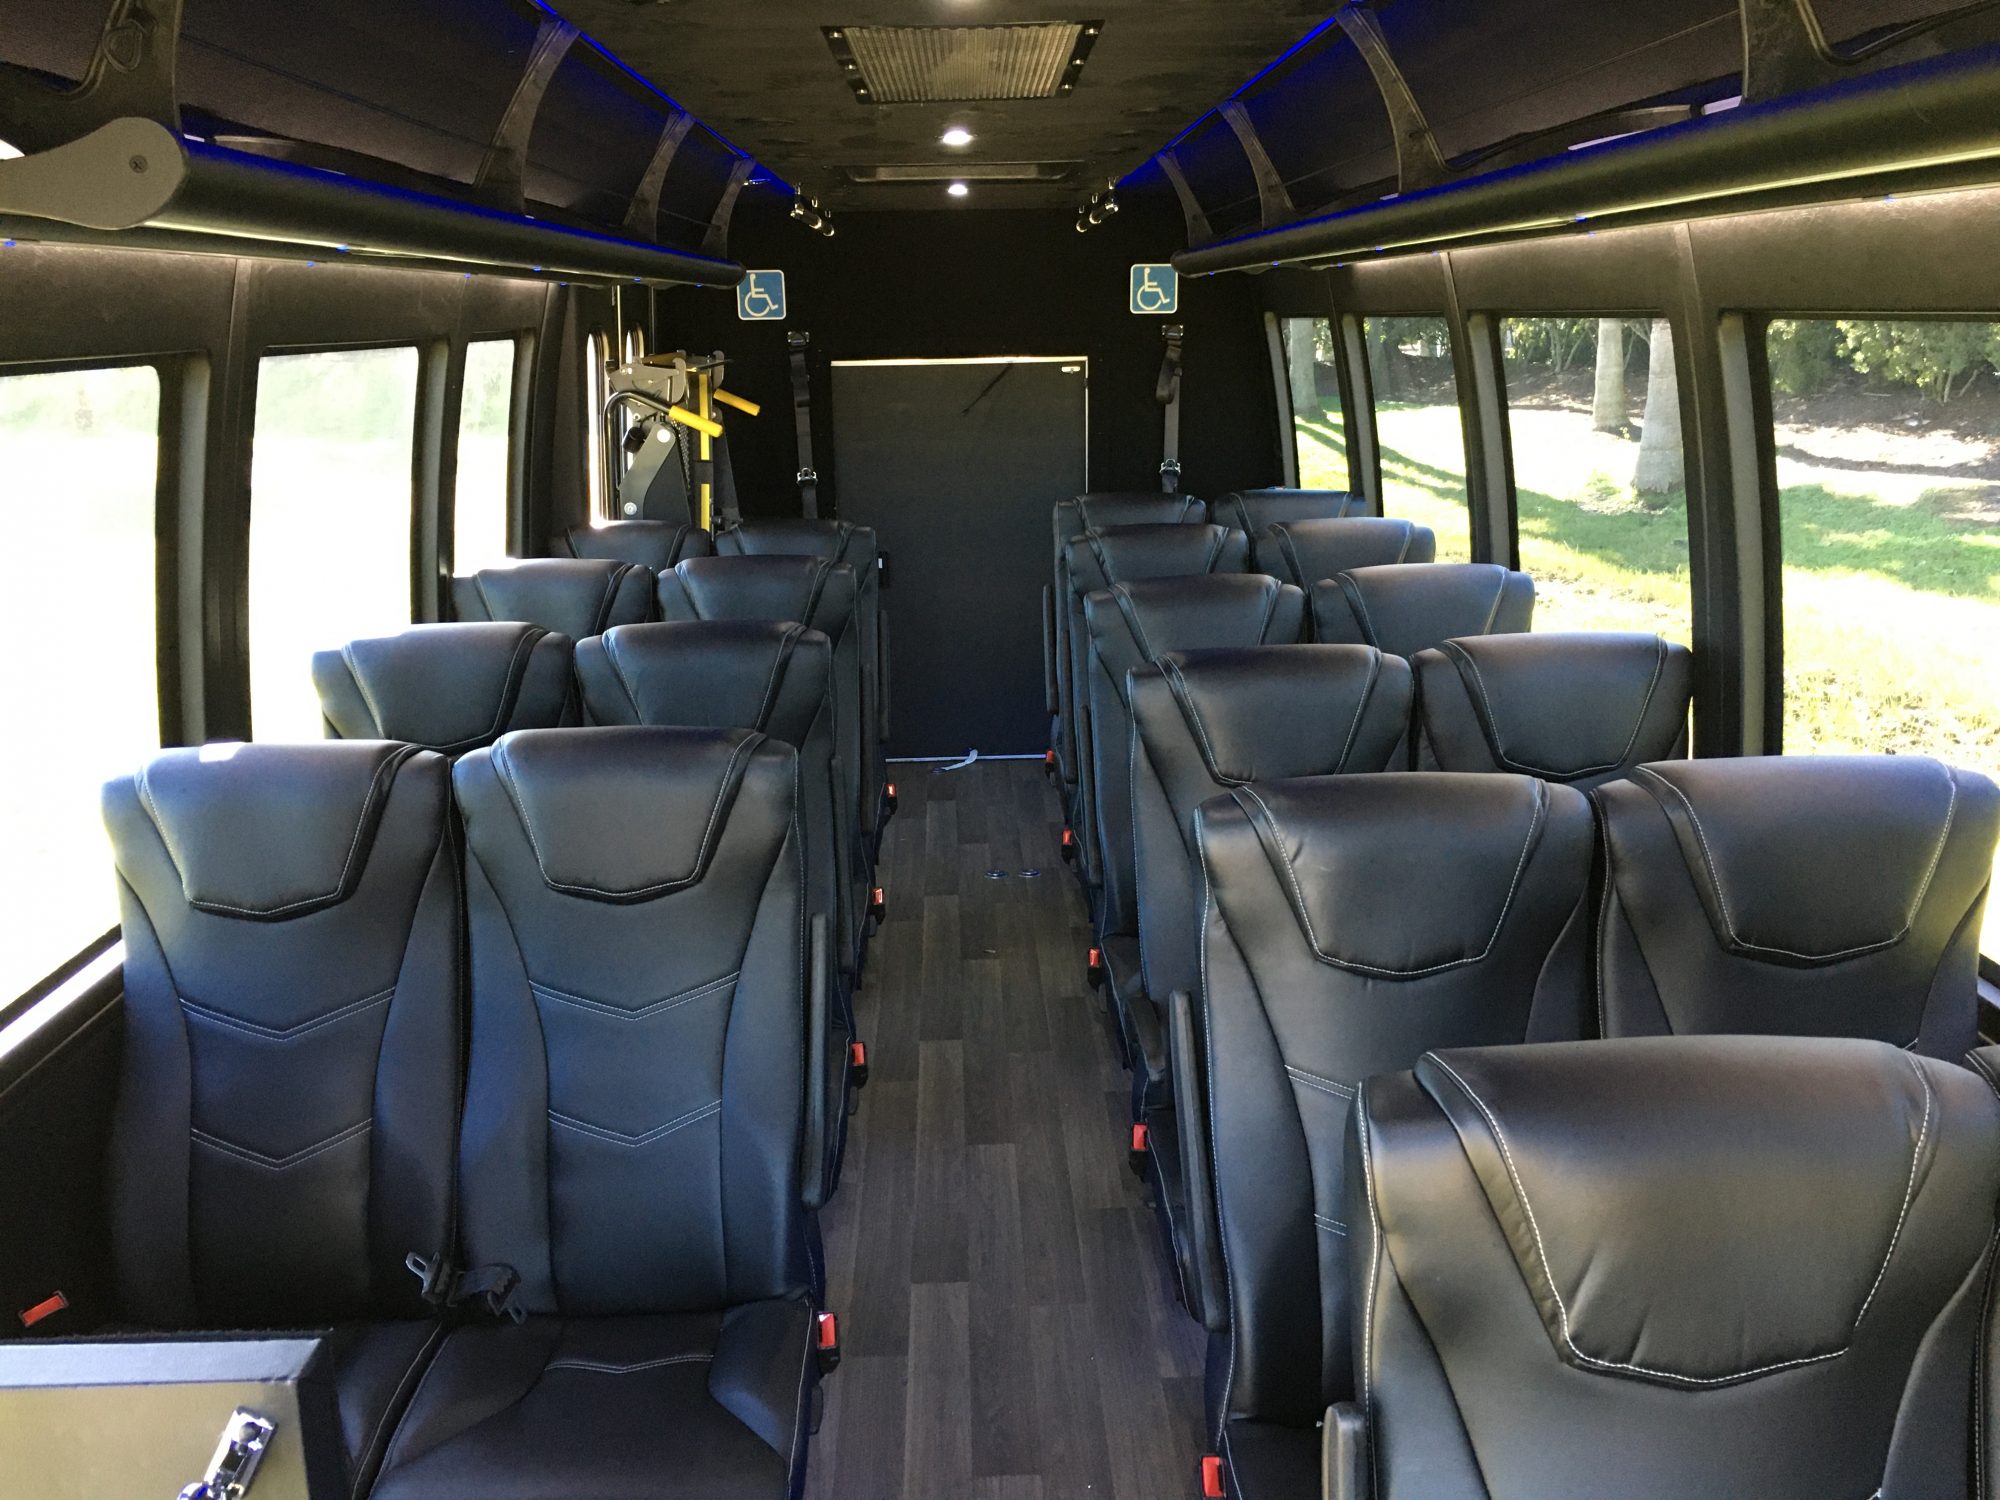 showing our houston airport transportation with ample seating and leg room for maximum comfort and stress free transportation